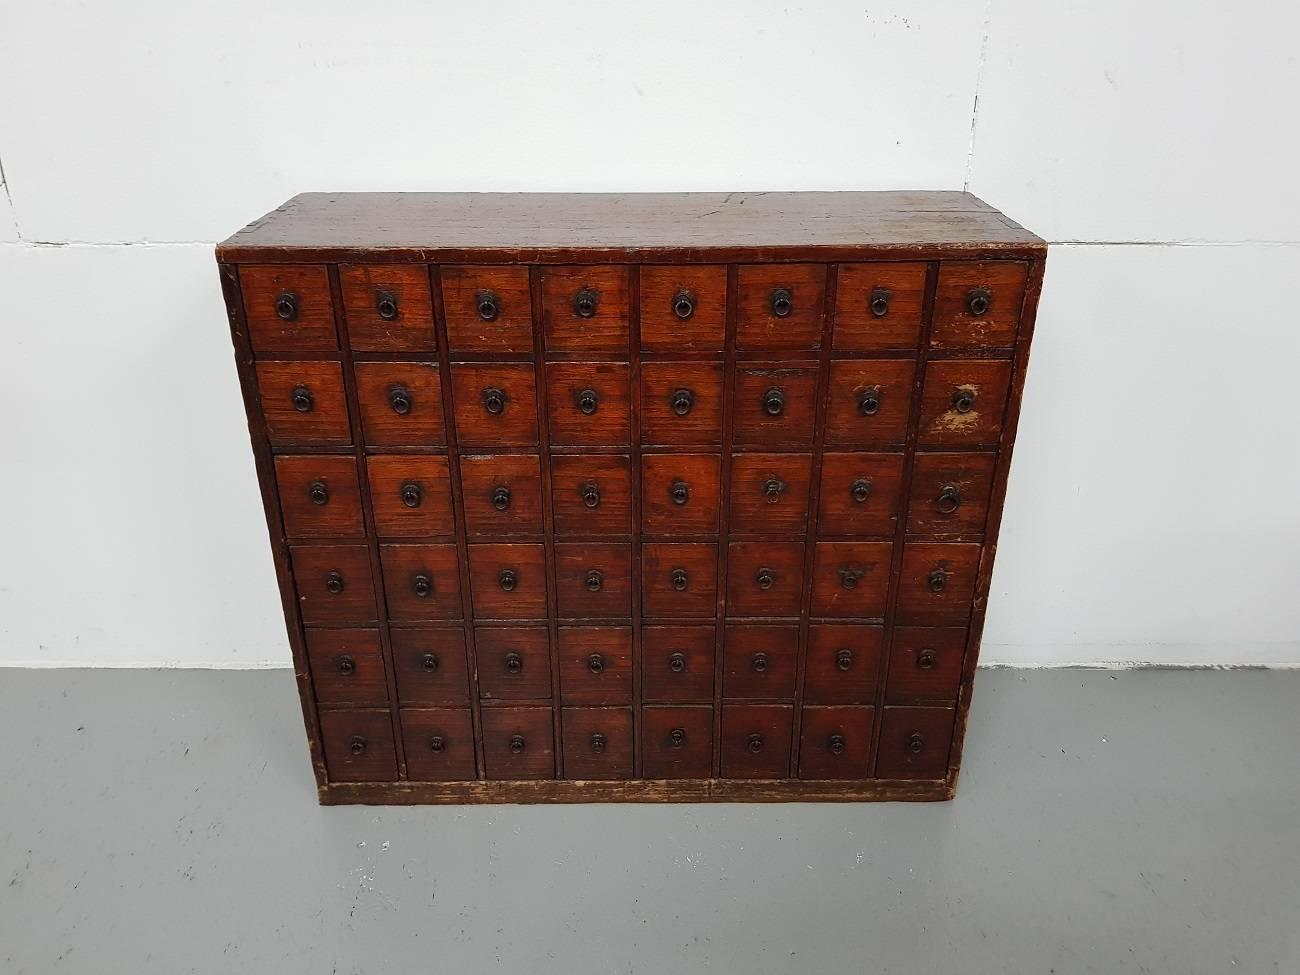 Antique late 19th century Japanese softwood pharmacists cabinet with 48 drawers with text on the back and on the side of the drawers it's sold by Luc Ritter Brussel in 1993 (it has old traces of woodworm but has been treated).

The measurements